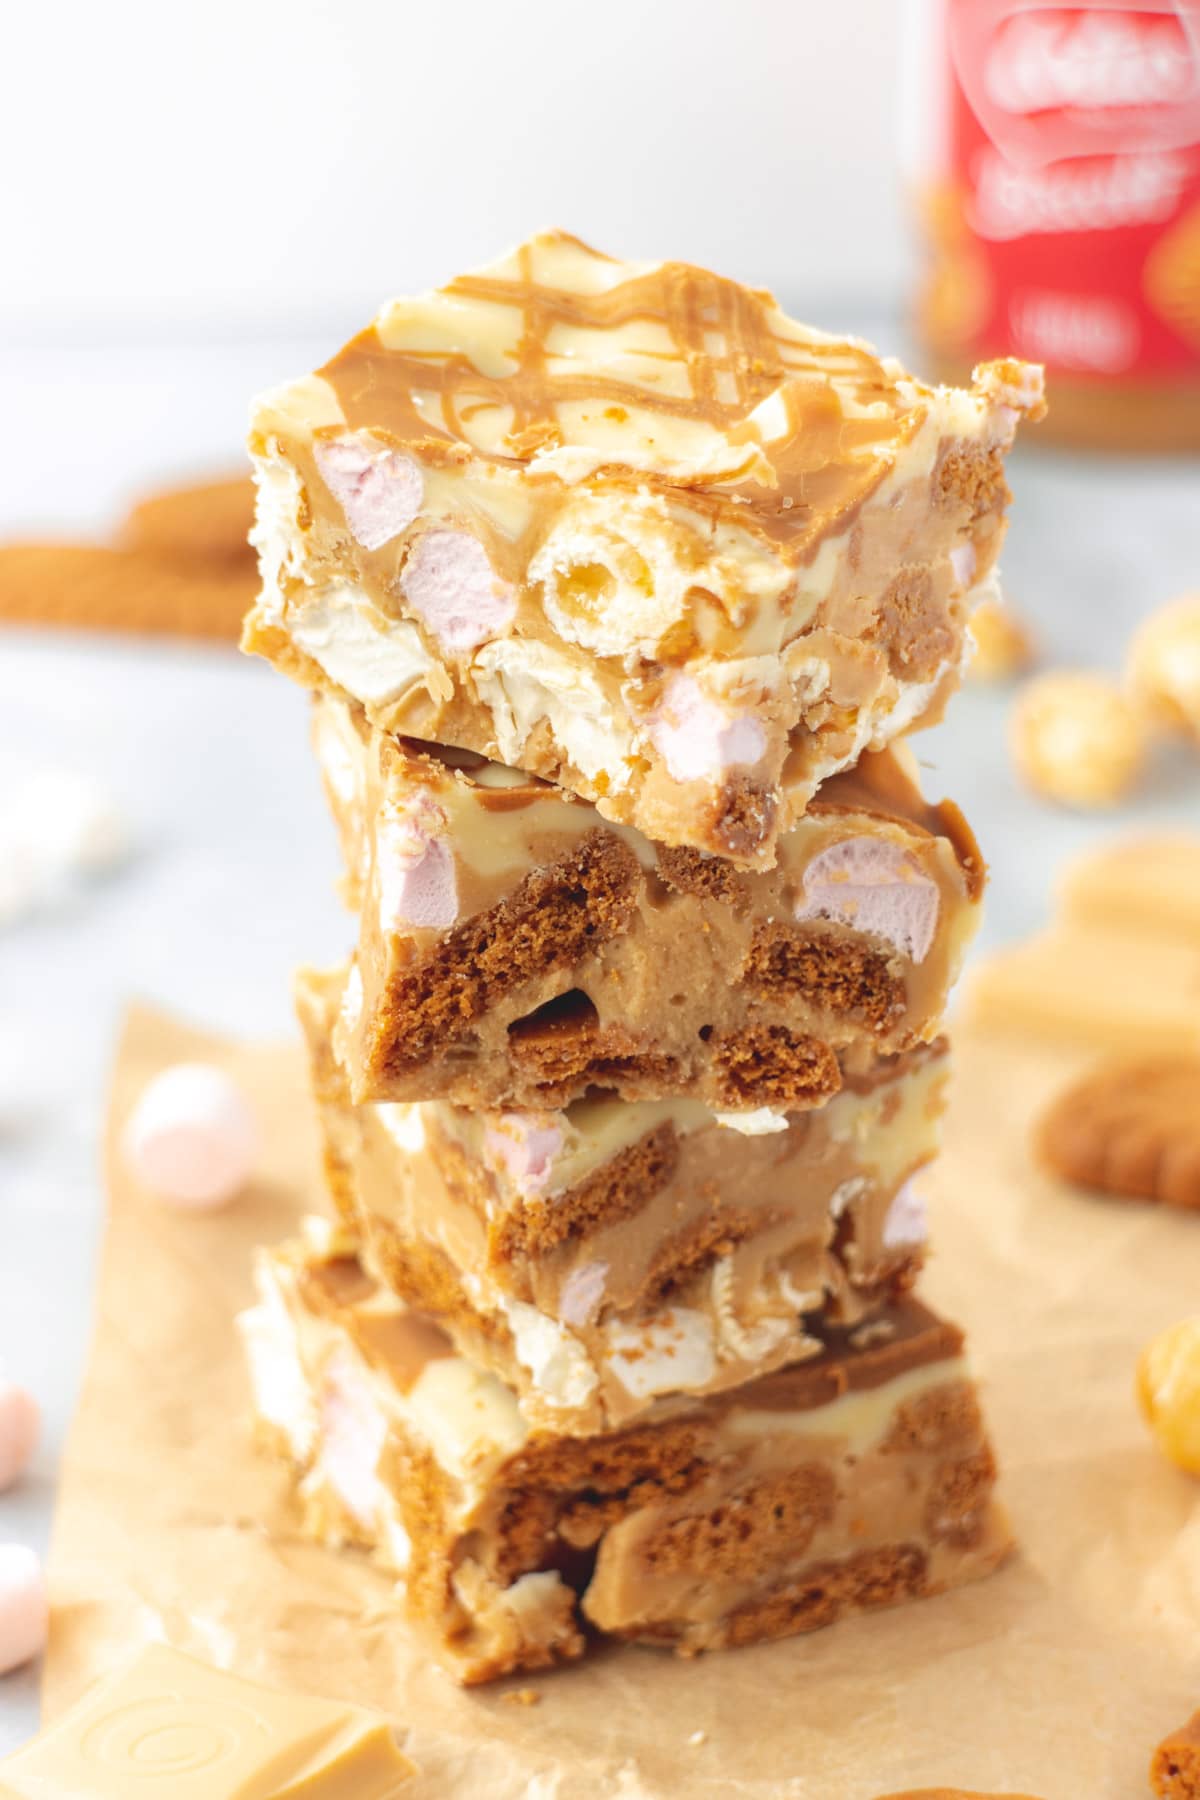 Stack of white chocolate coated rocky road with Lotus Biscoff spread